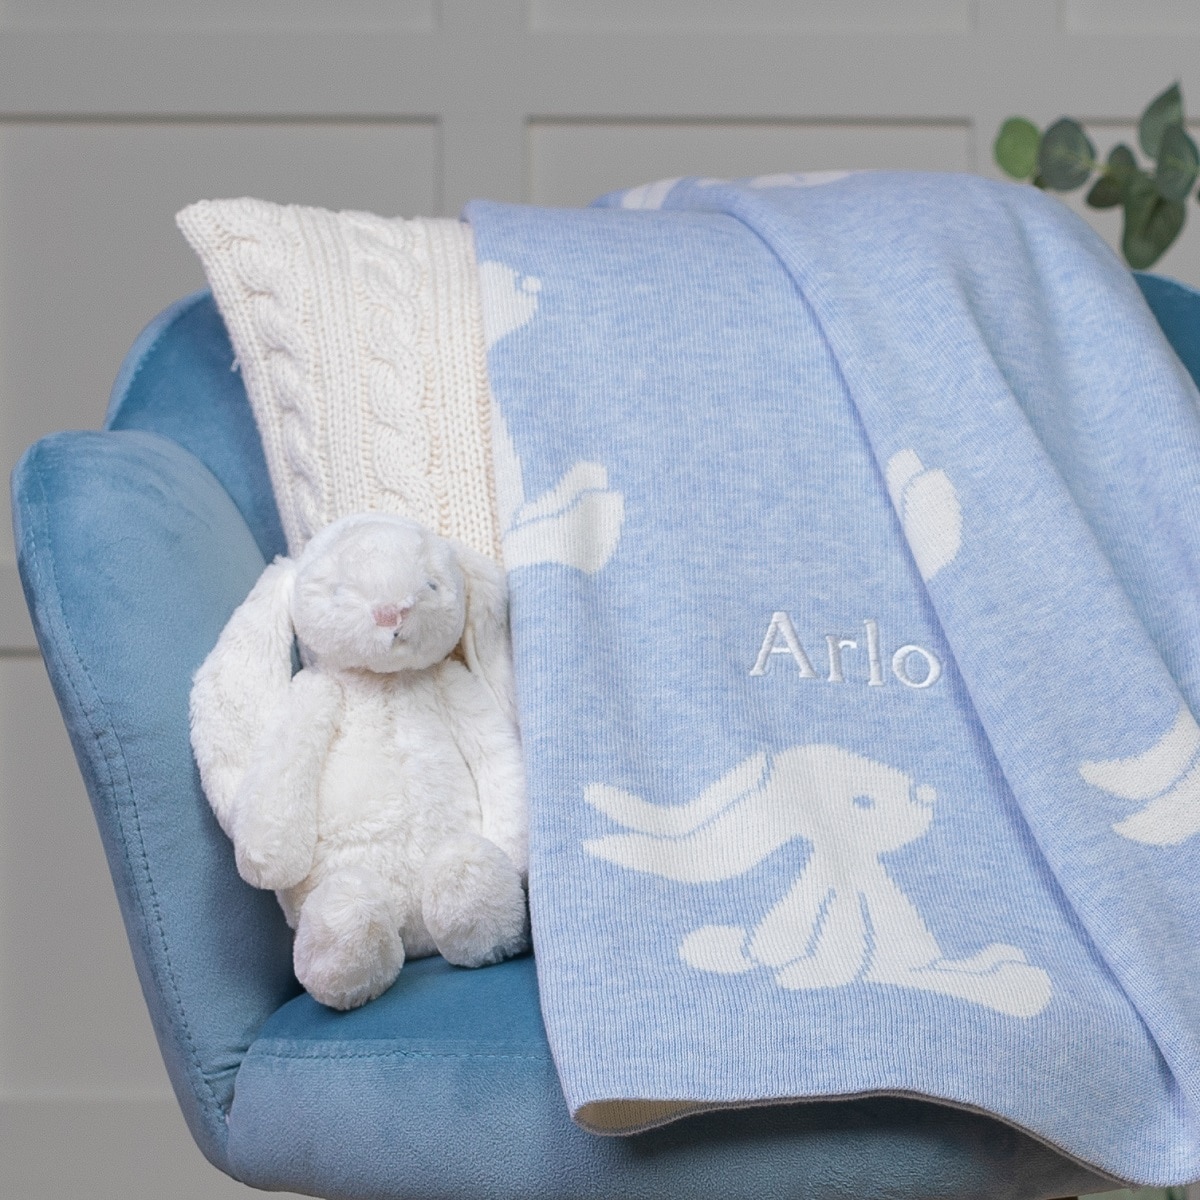 Personalised Jellycat blue bashful bunny and baby blanket gift set